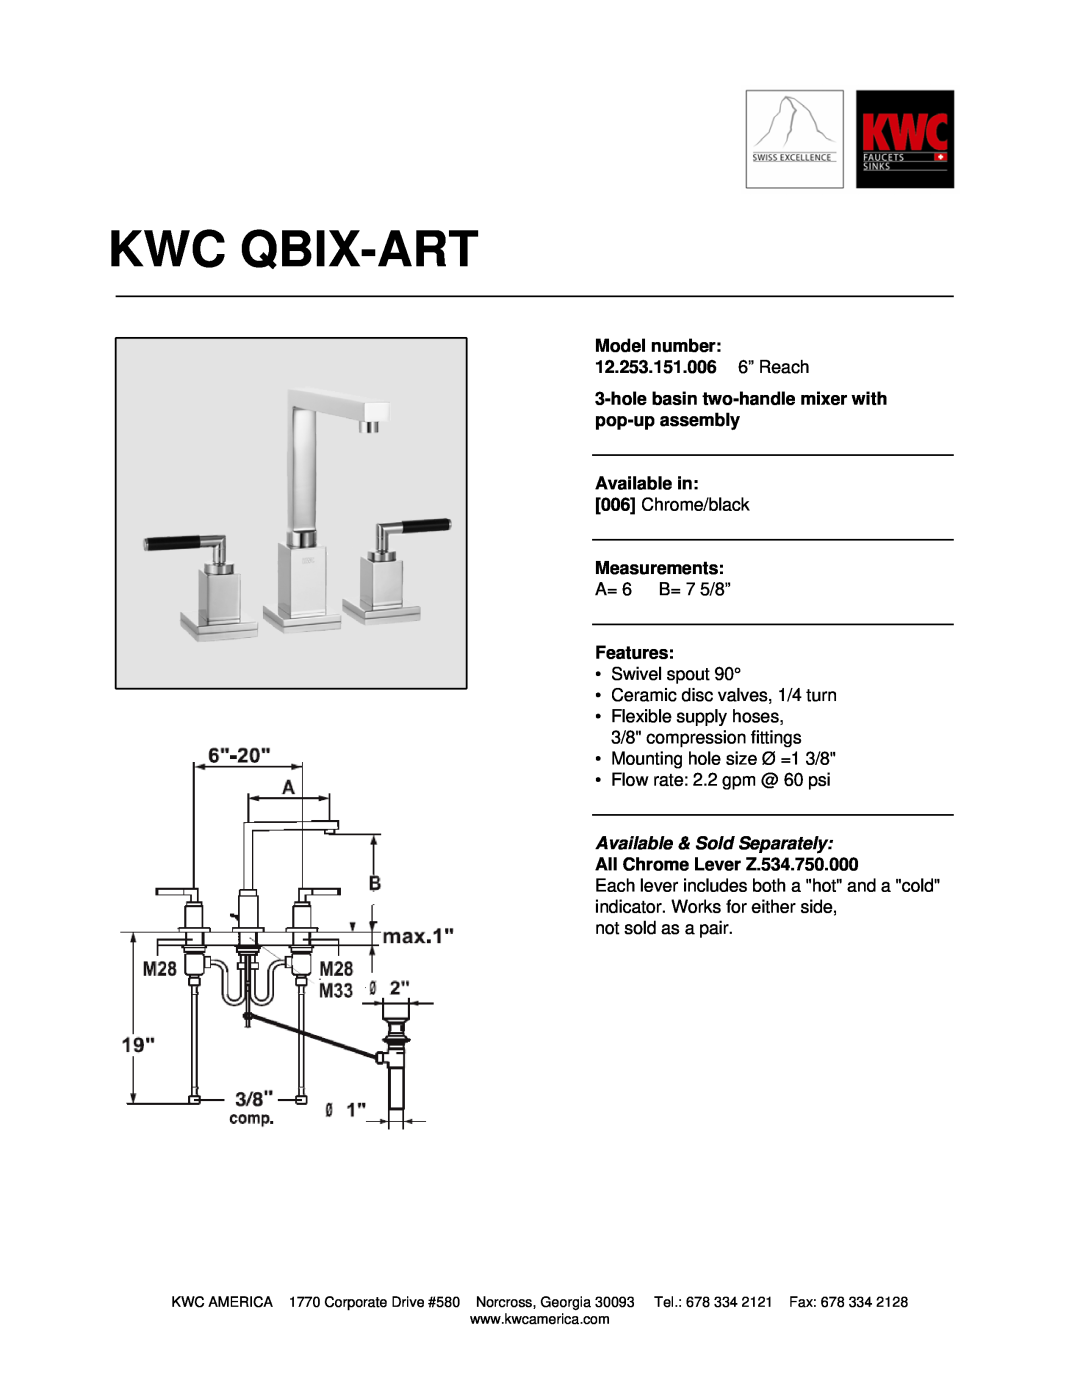 KWC manual Kwc Qbix-Art, Model number 12.253.151.006 6” Reach, holebasin two-handlemixer with pop-upassembly, Features 